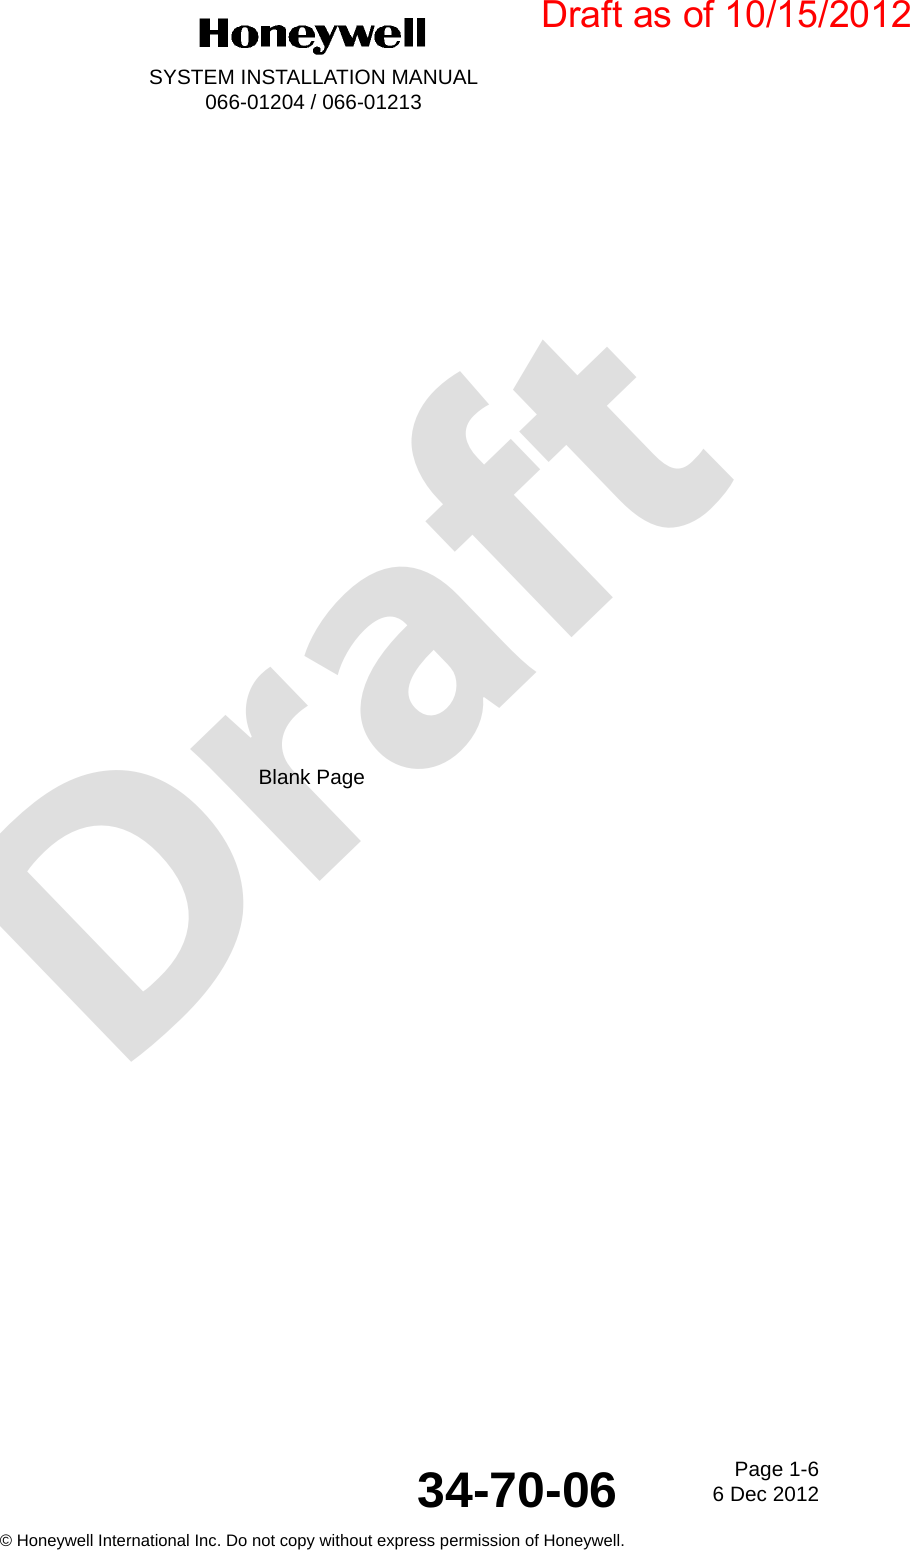 DraftPage 1-66 Dec 201234-70-06SYSTEM INSTALLATION MANUAL066-01204 / 066-01213© Honeywell International Inc. Do not copy without express permission of Honeywell.Blank PageDraft as of 10/15/2012